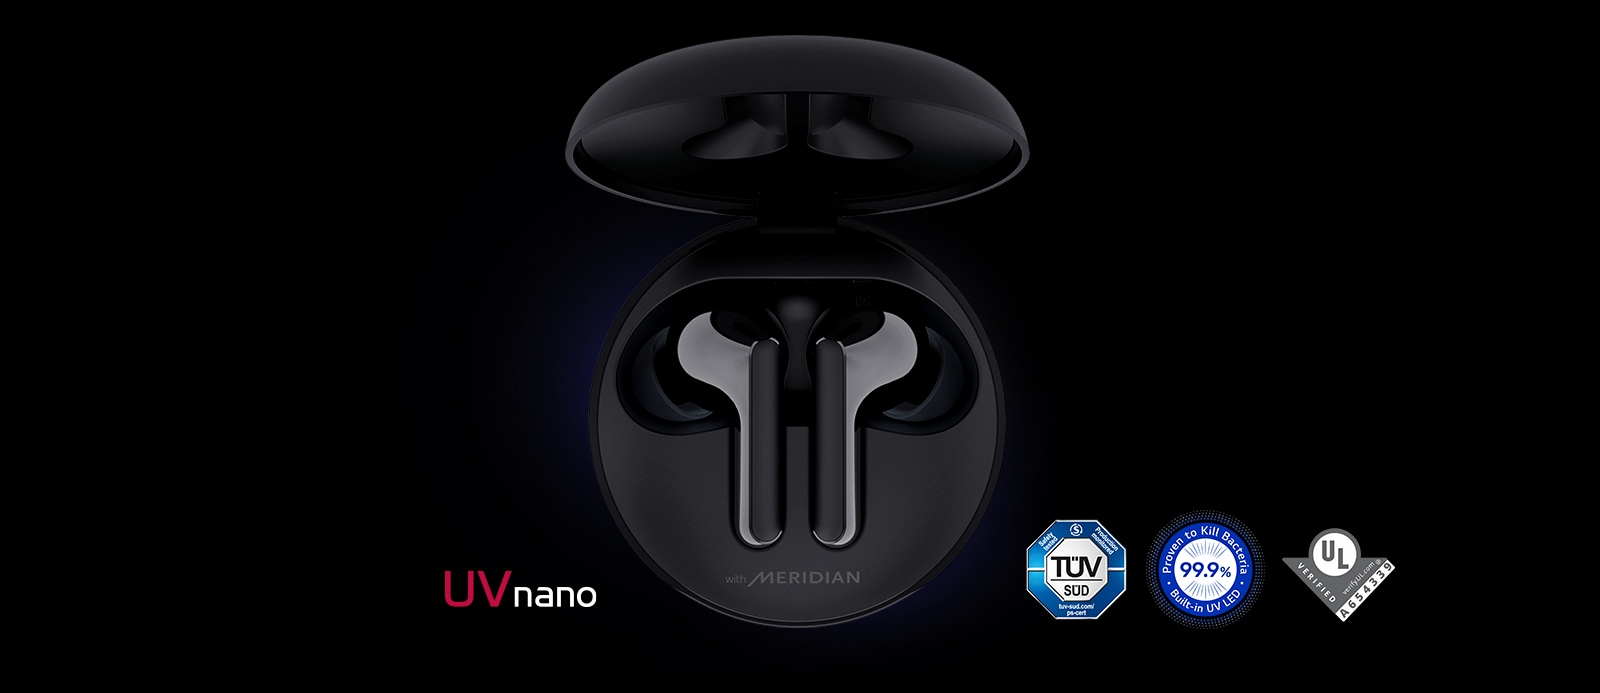 An image of the cradle opened up with earbuds sitting inside it and blue lighting shining to highlight the UVnano feature